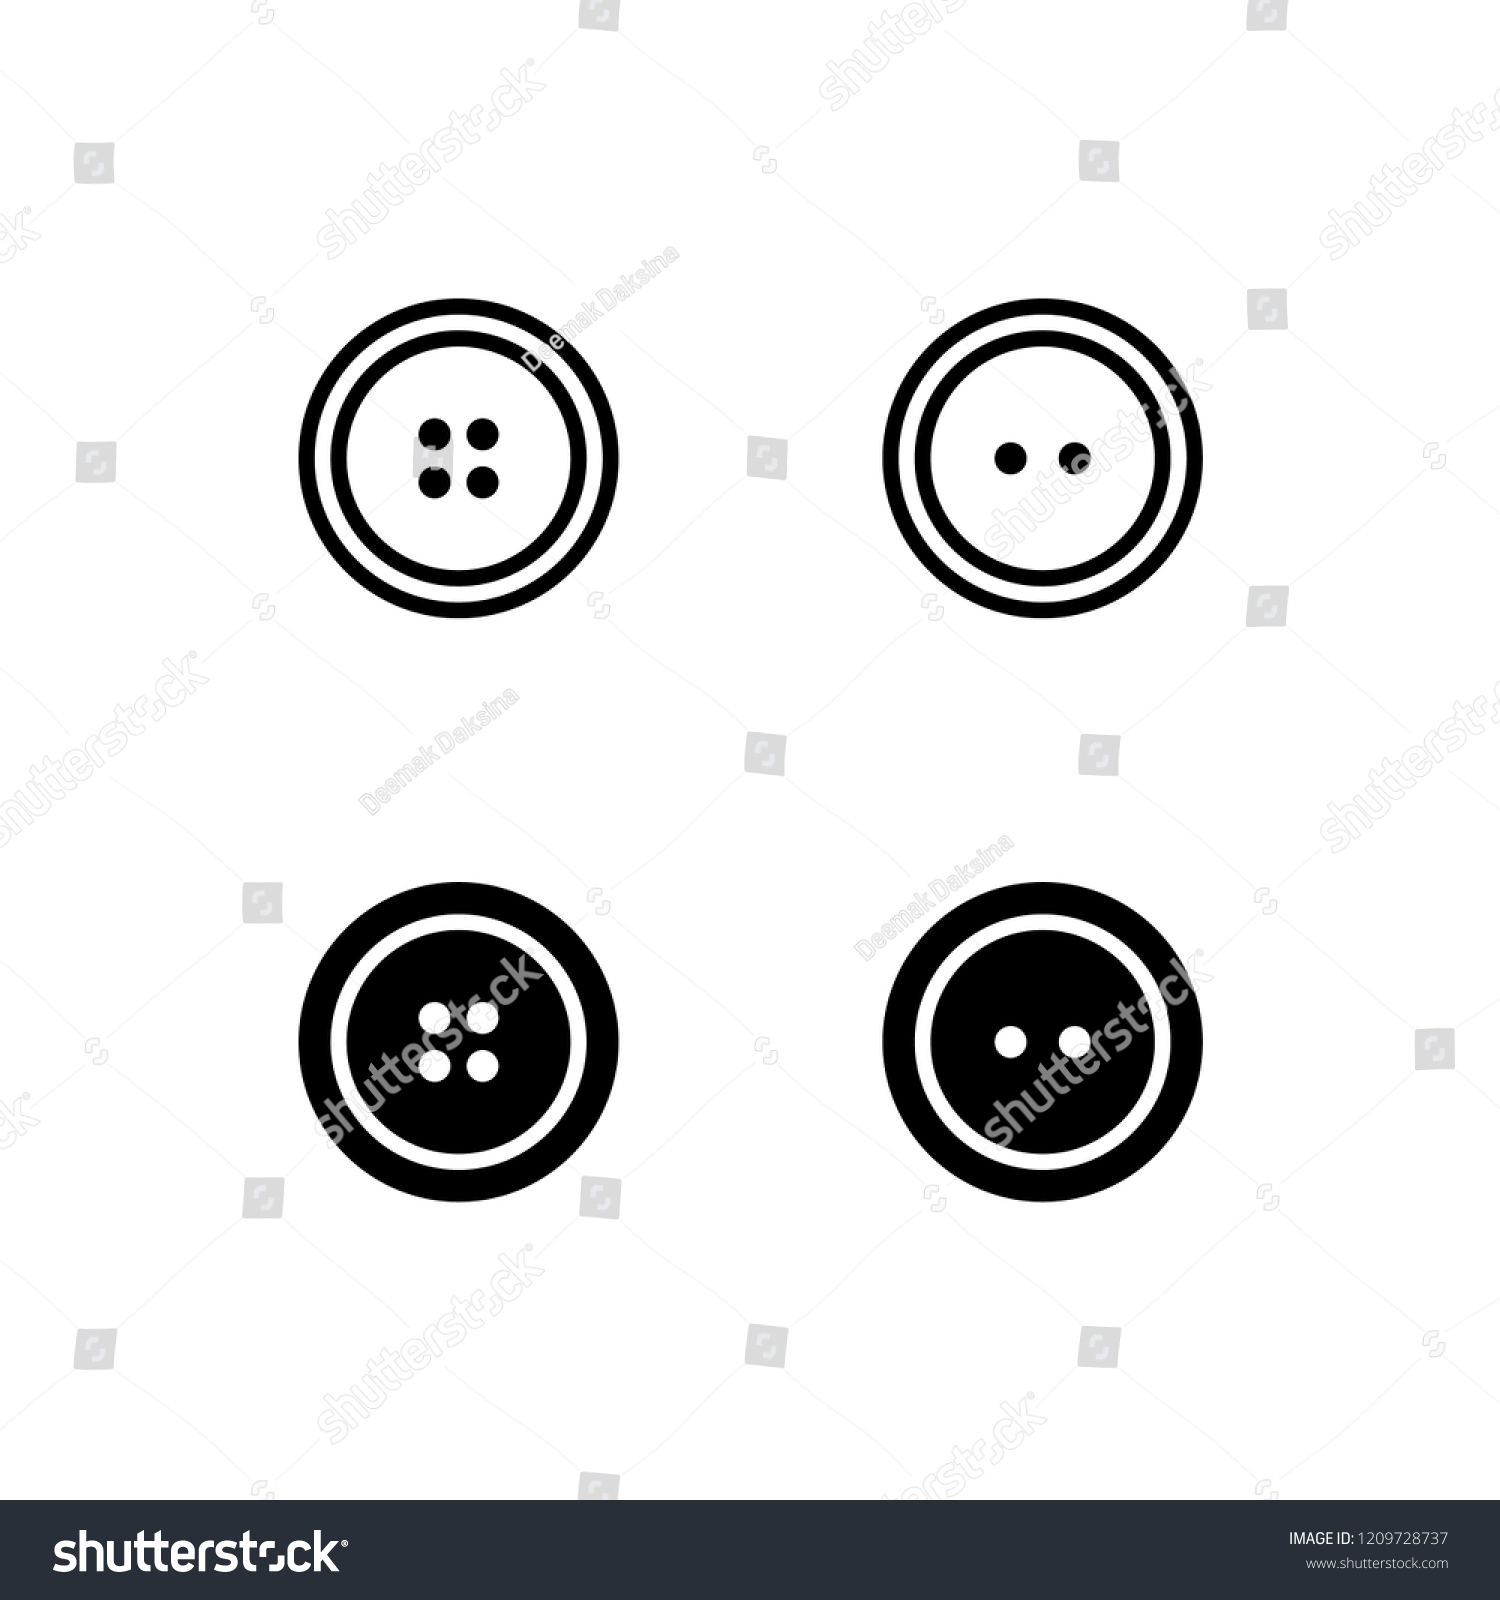 126,811 Sewing on buttons Images, Stock Photos & Vectors | Shutterstock